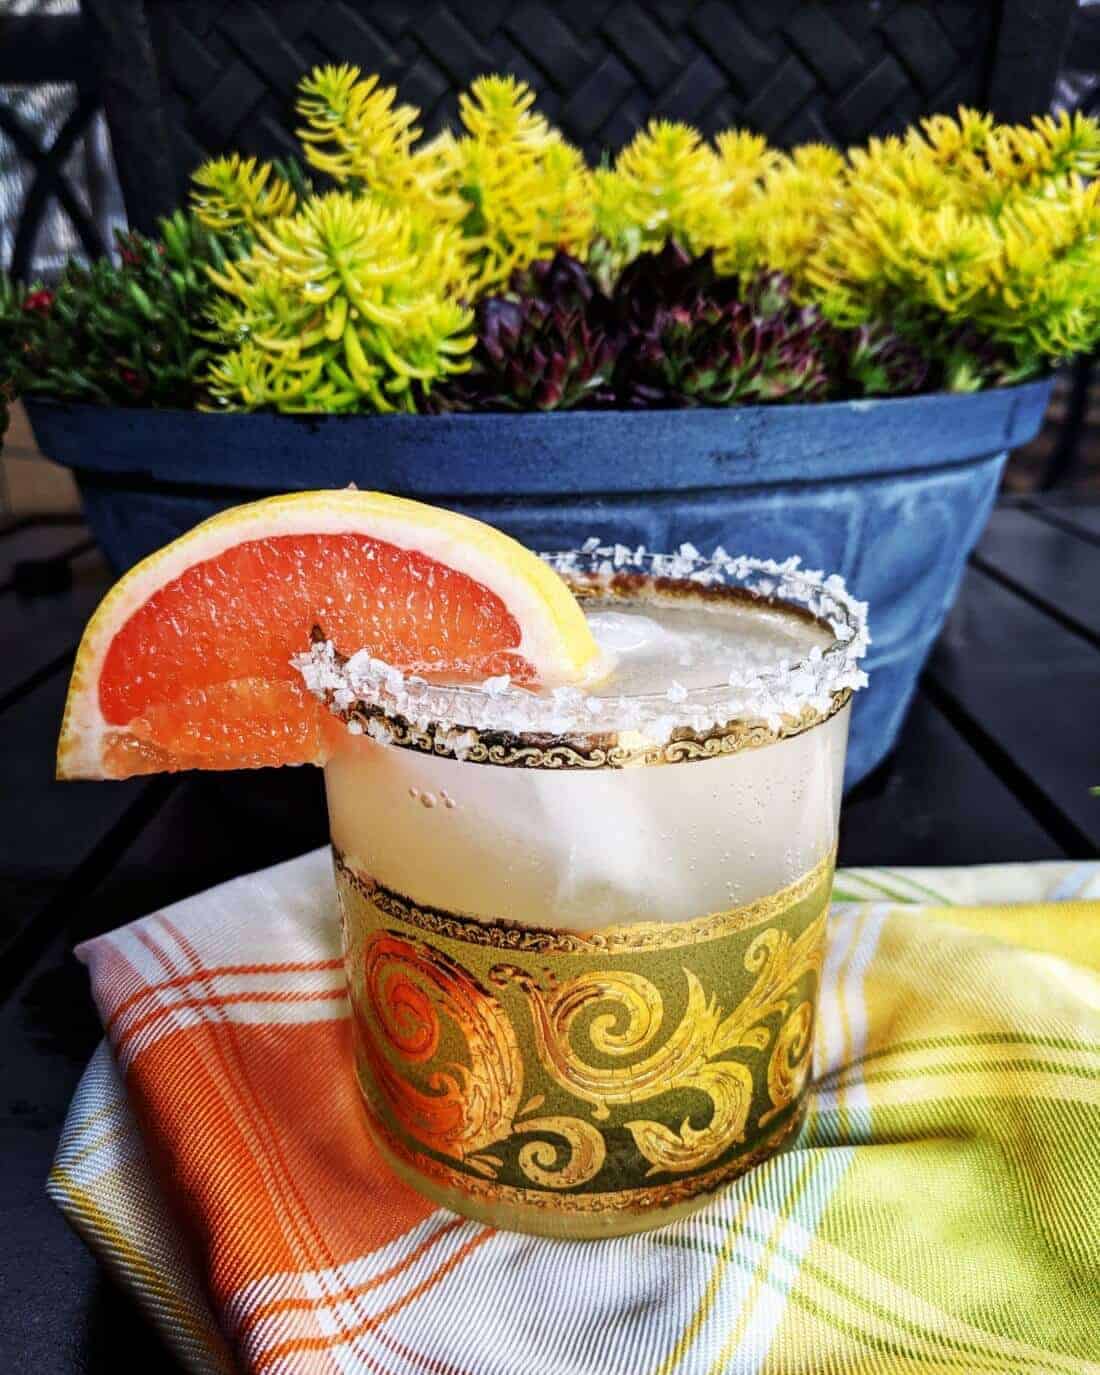 checkered tablecloth underneath a glass of Paloma Cocktail with Salted Rim garnish with a slice of grapefruit